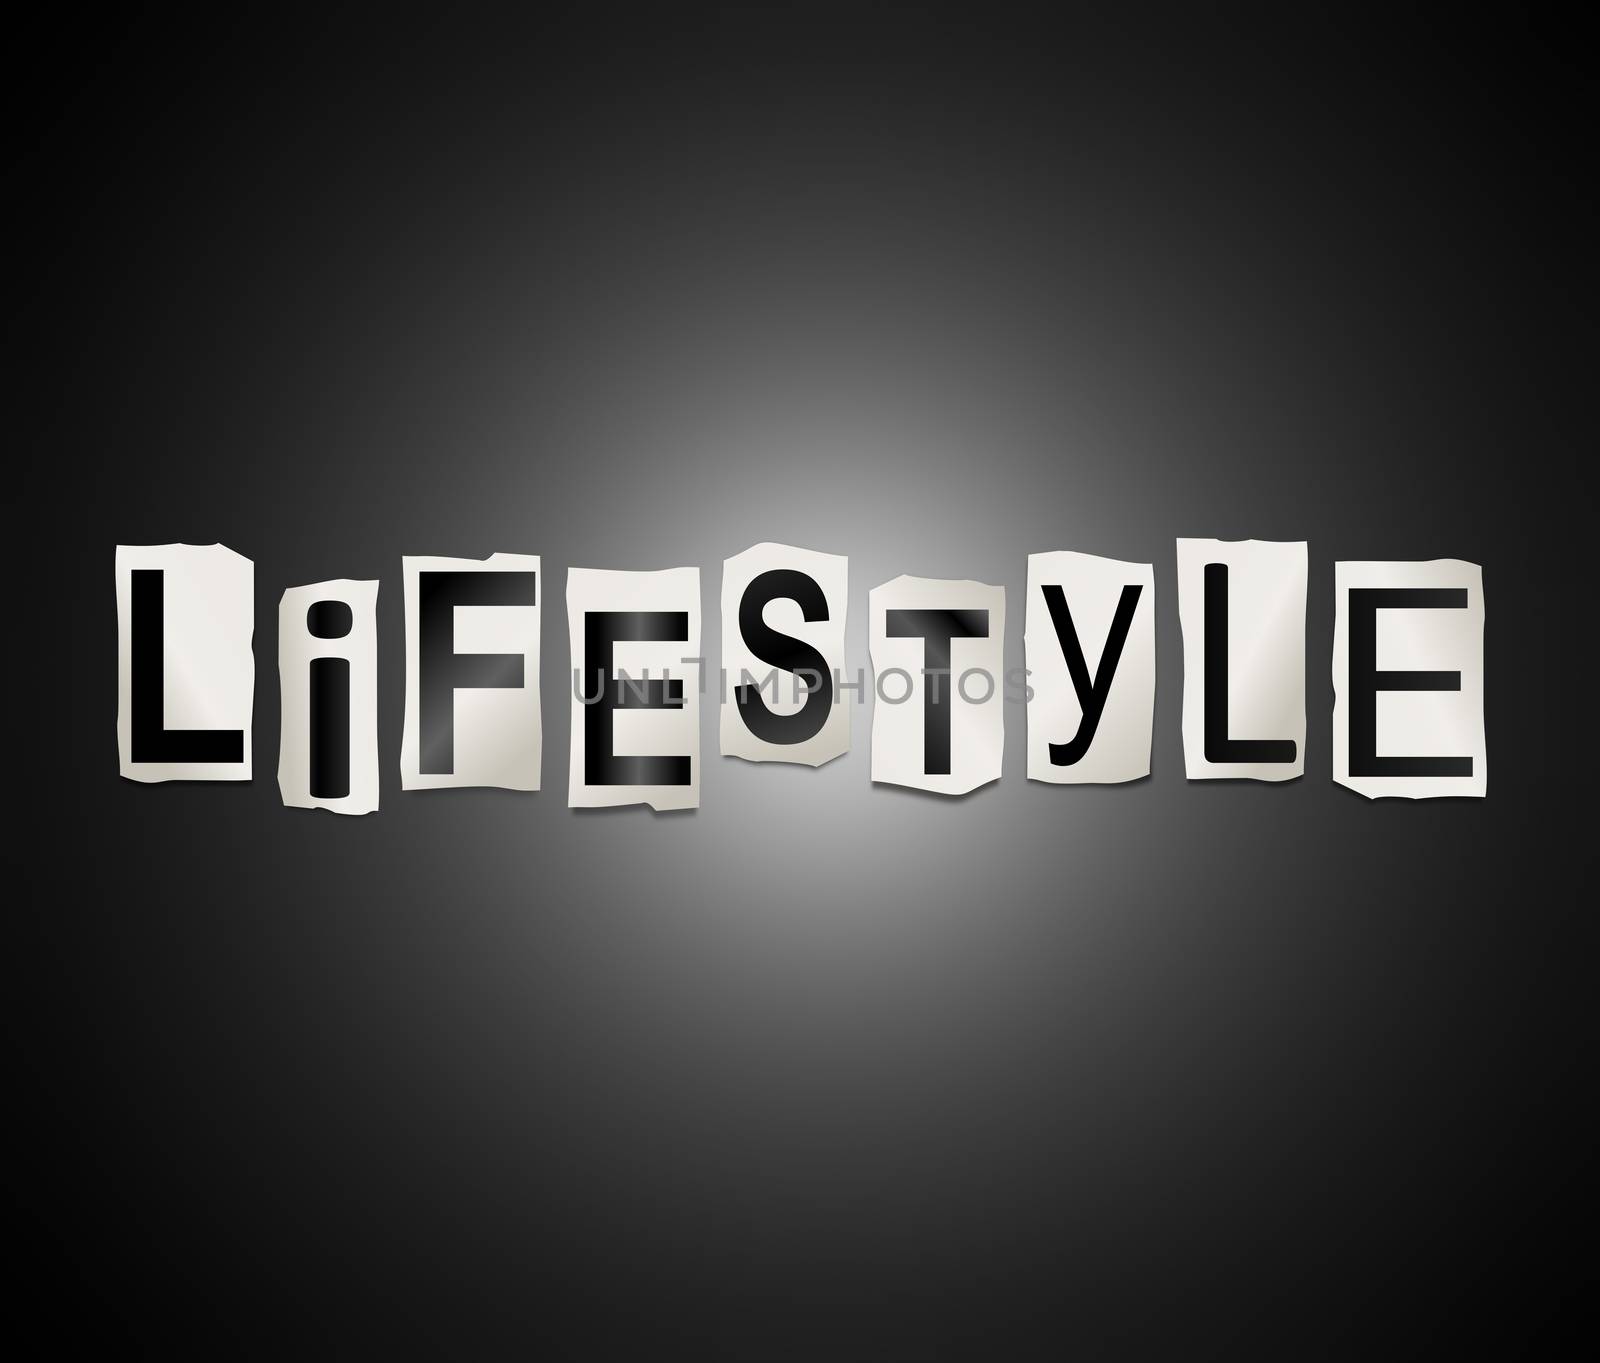 Illustration depicting a set of cut out printed letters arranged to form the word lifestyle.